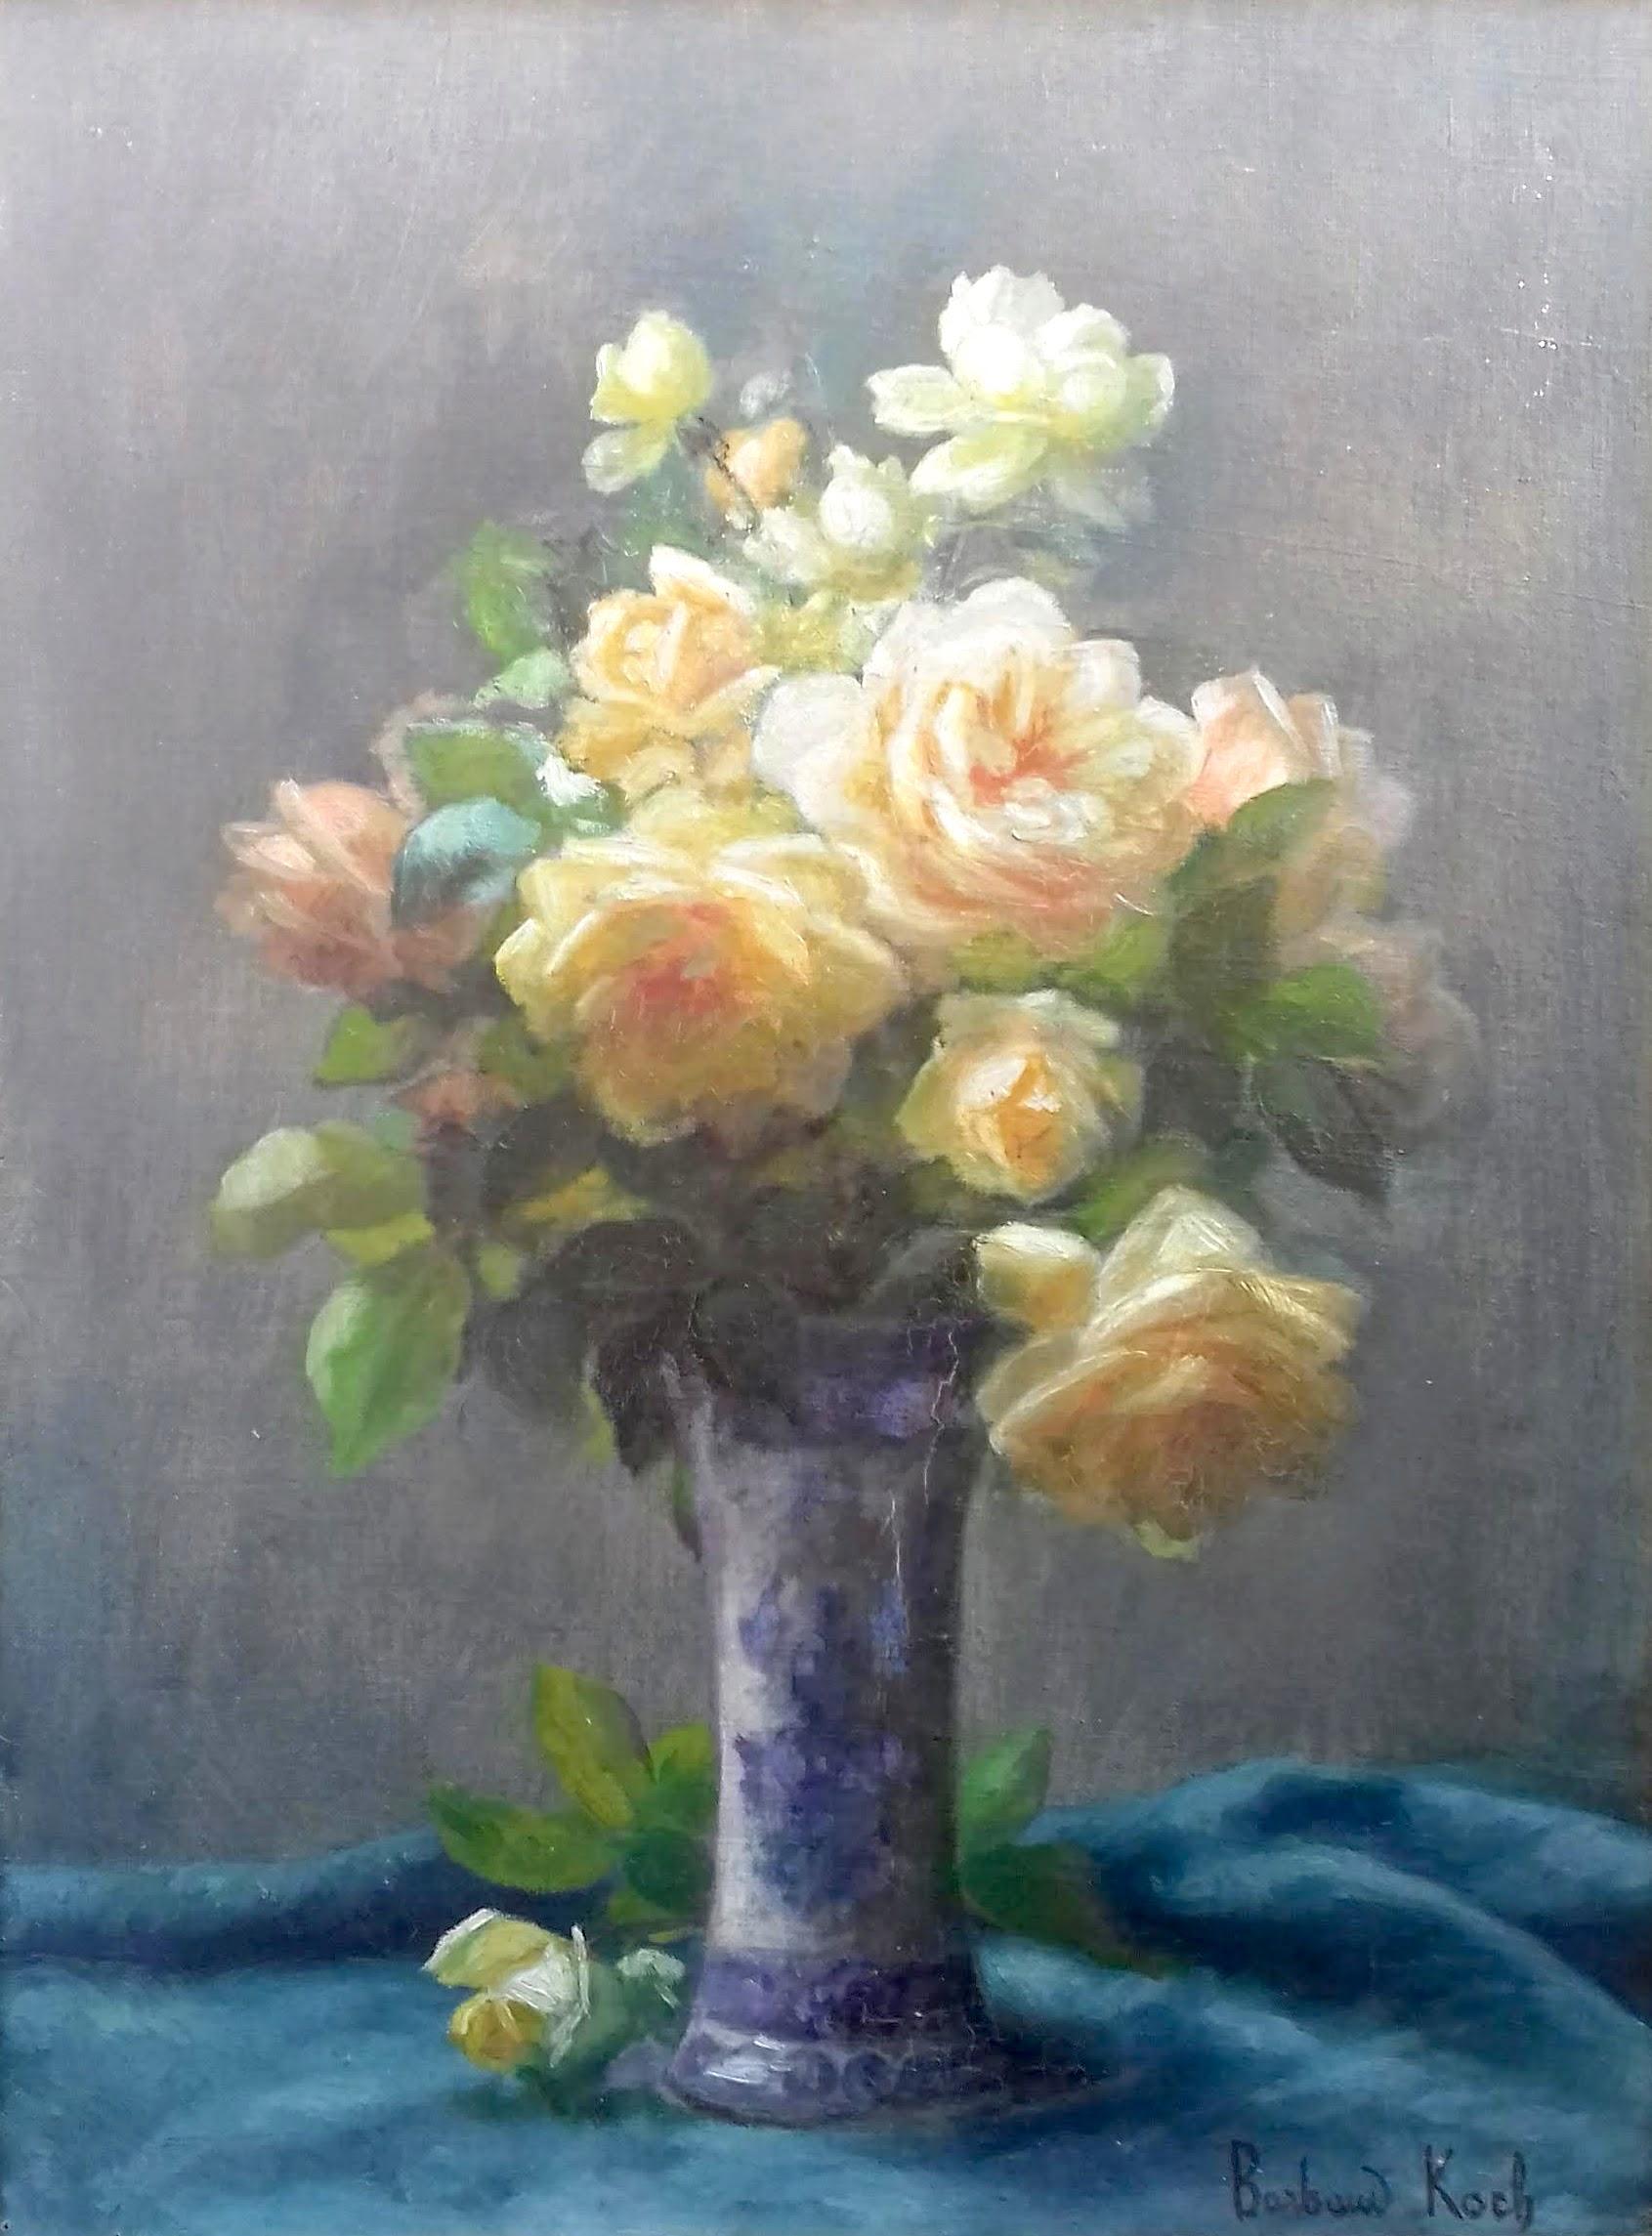 Marthe Élisabeth Barbaud-Koch Still-Life Painting - Bouquet Roses Floral Still Life French Art Nouveau period oil painting